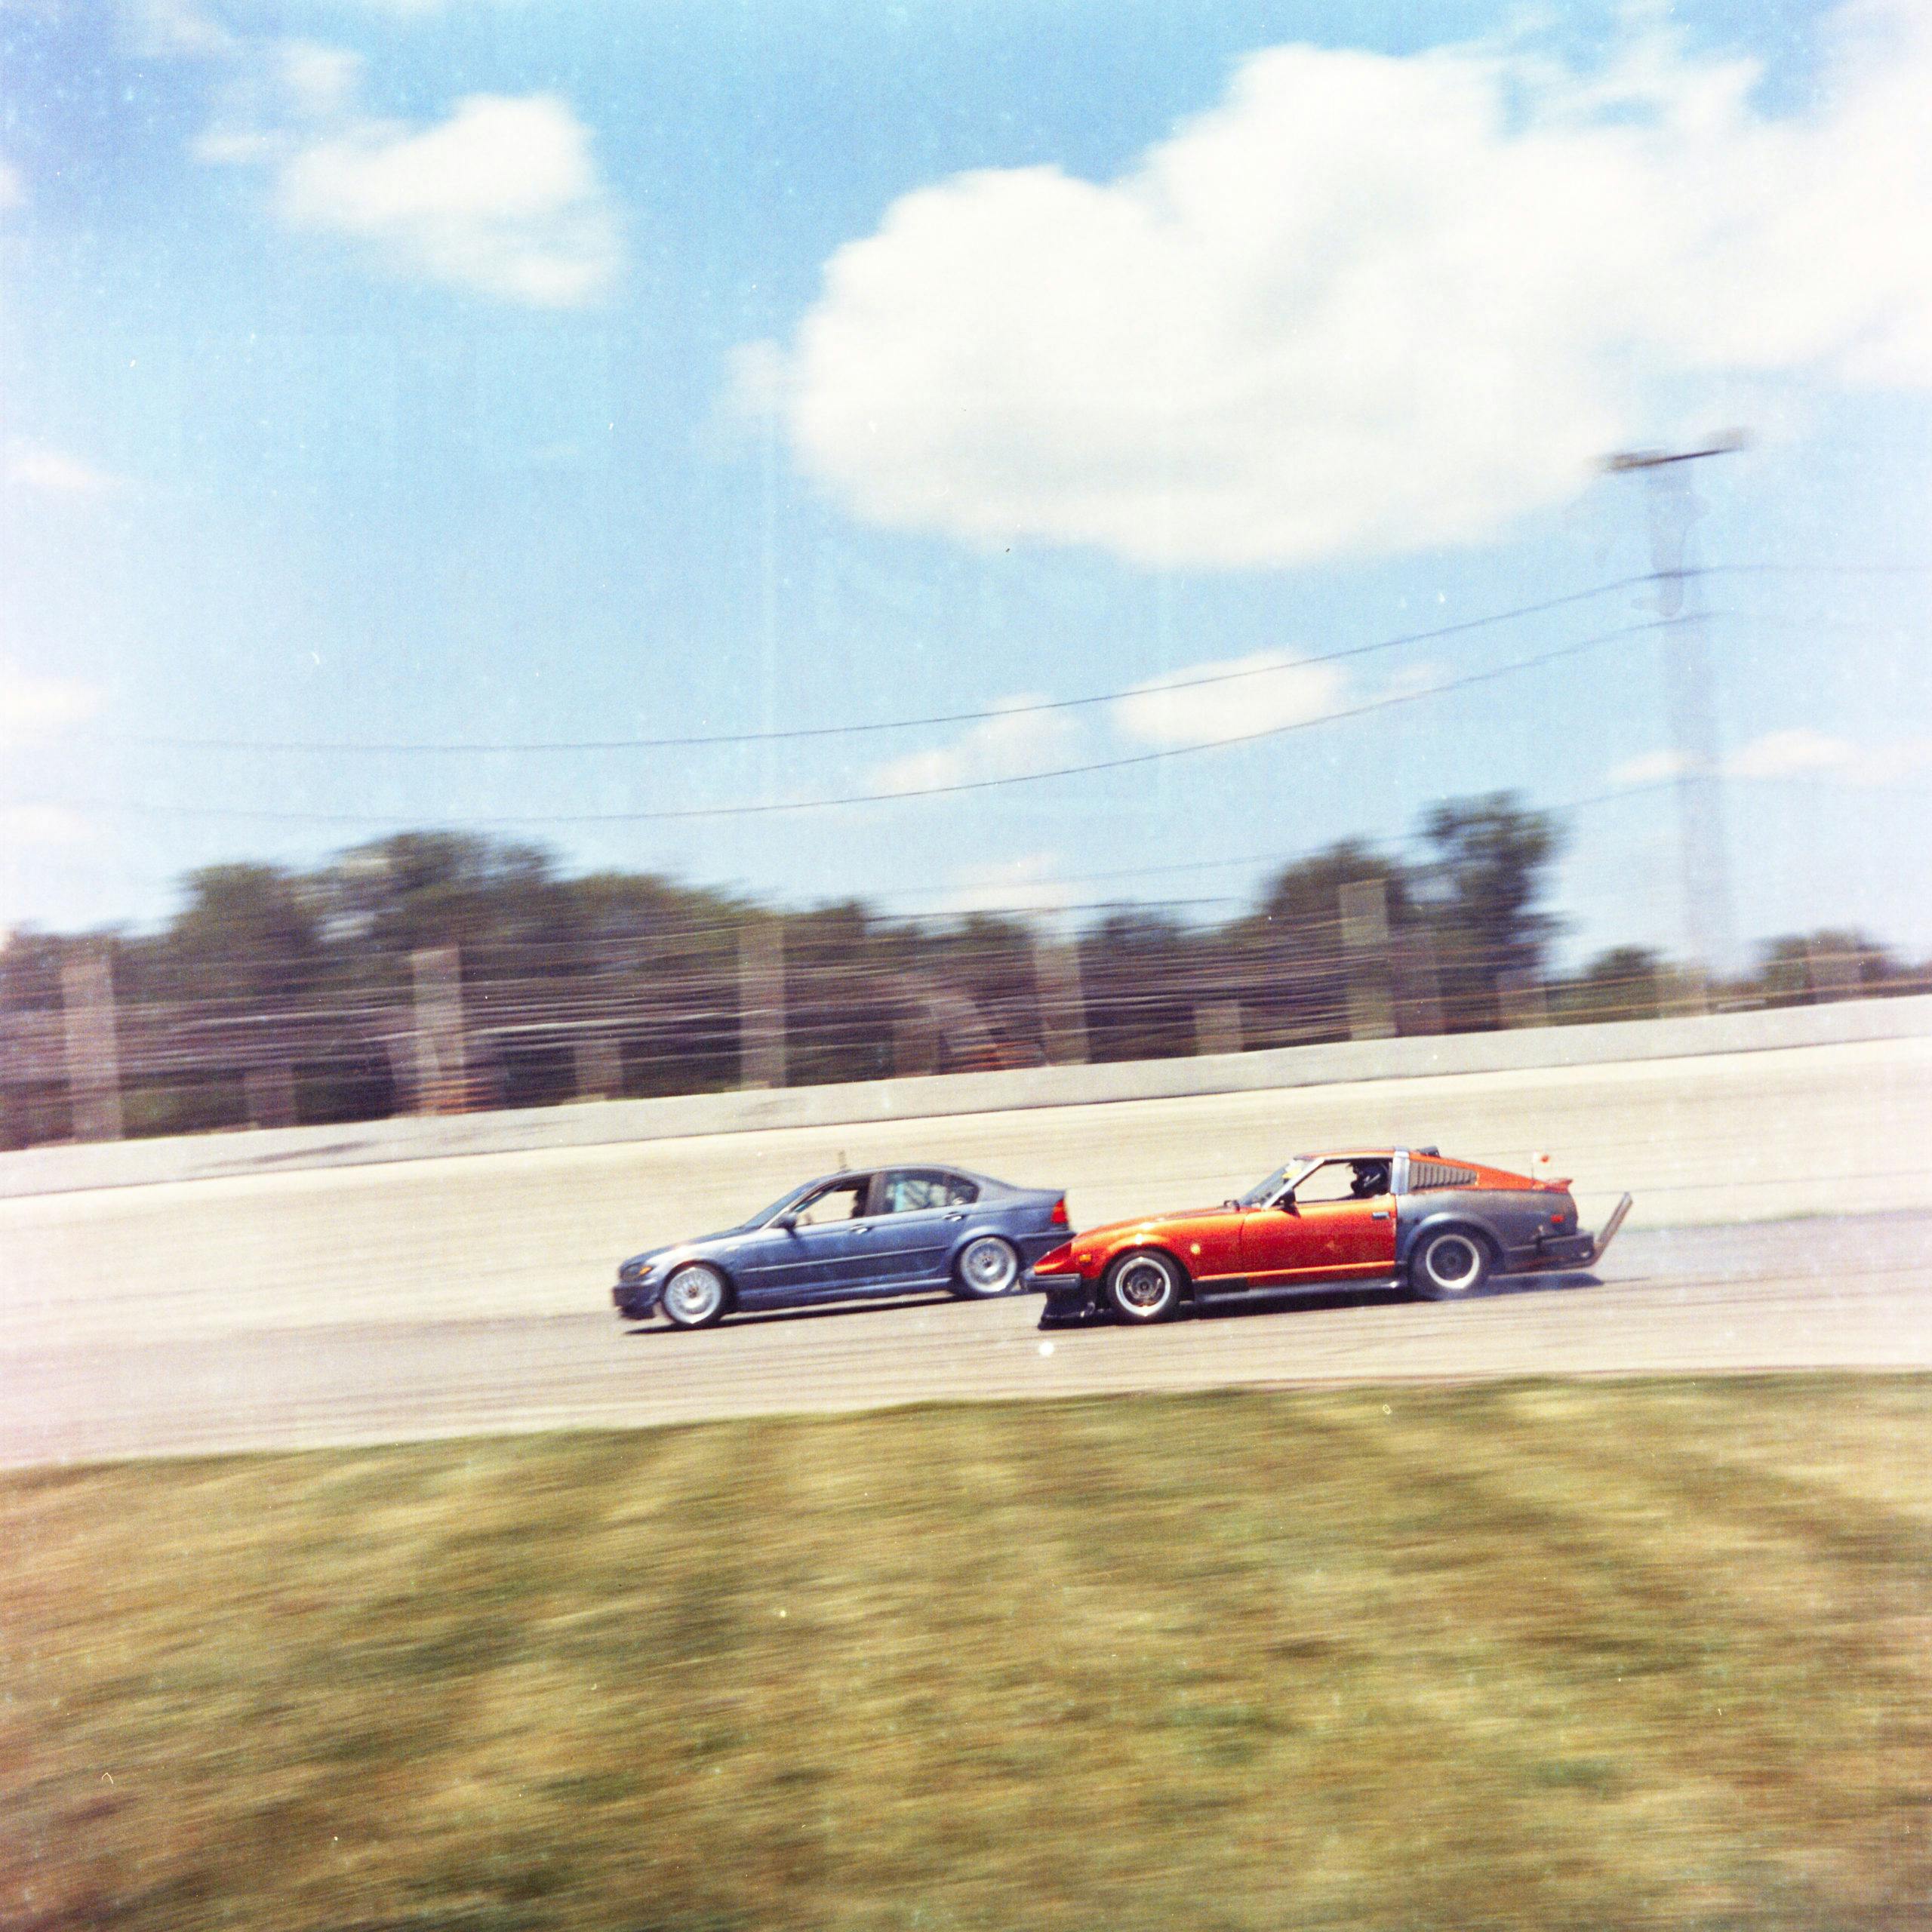 Motorsports track day film photography tips vertical wide